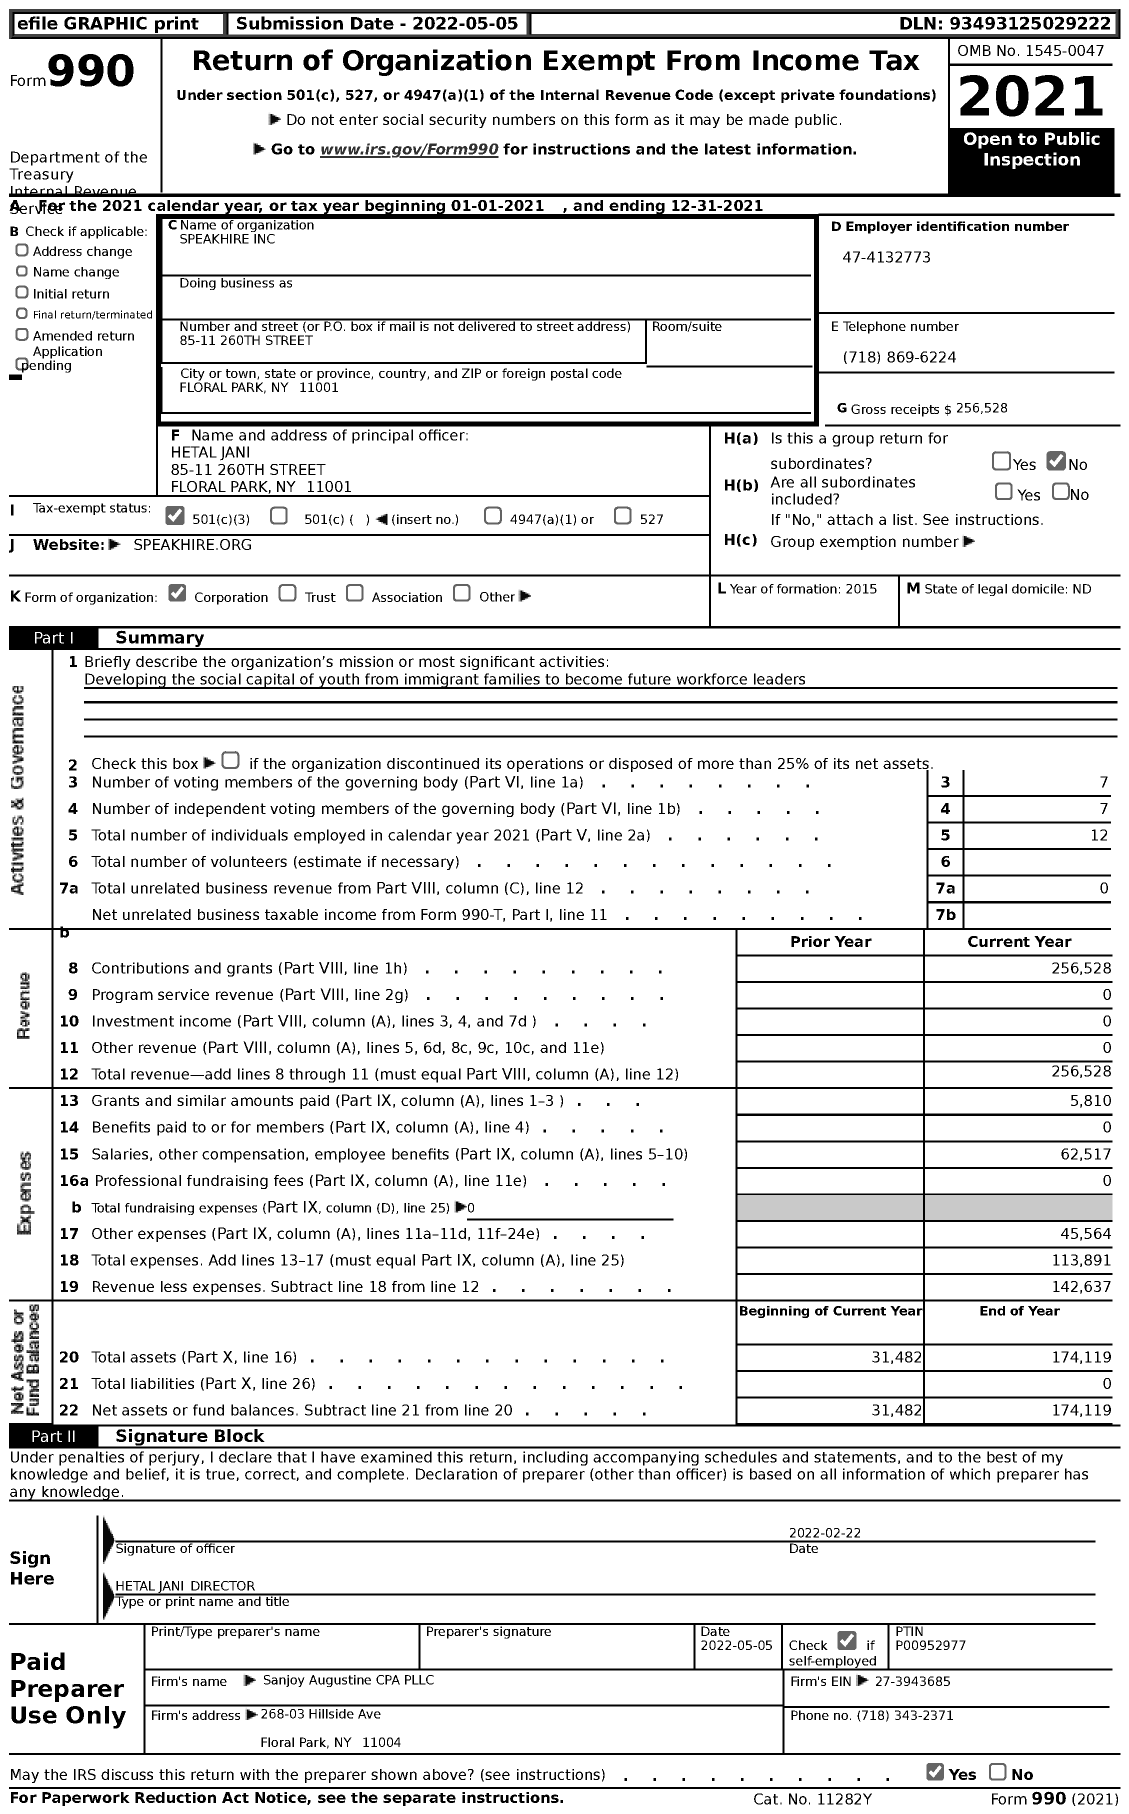 Image of first page of 2021 Form 990 for Speakhire